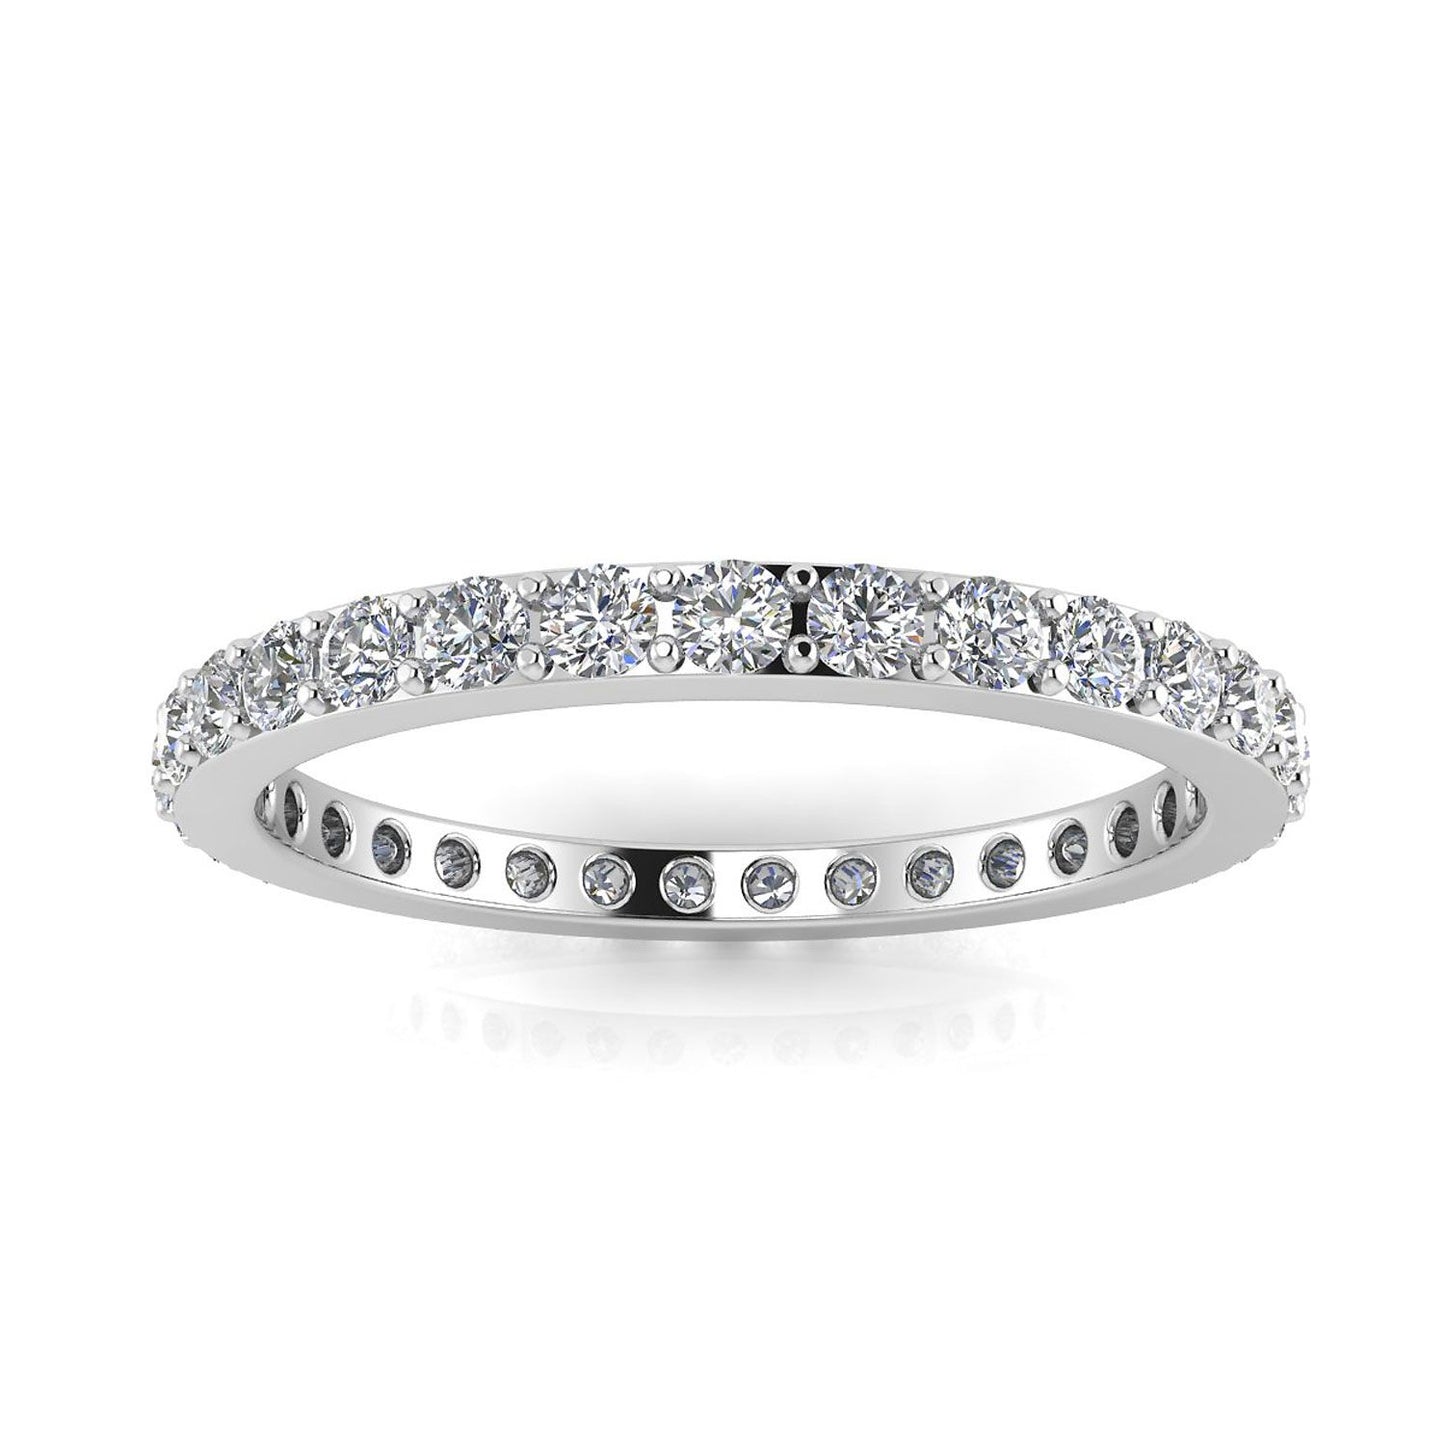 Round Brilliant Cut Diamond Pave Set Eternity Ring In 14k White Gold  (1.43ct. Tw.) Ring Size 5.5